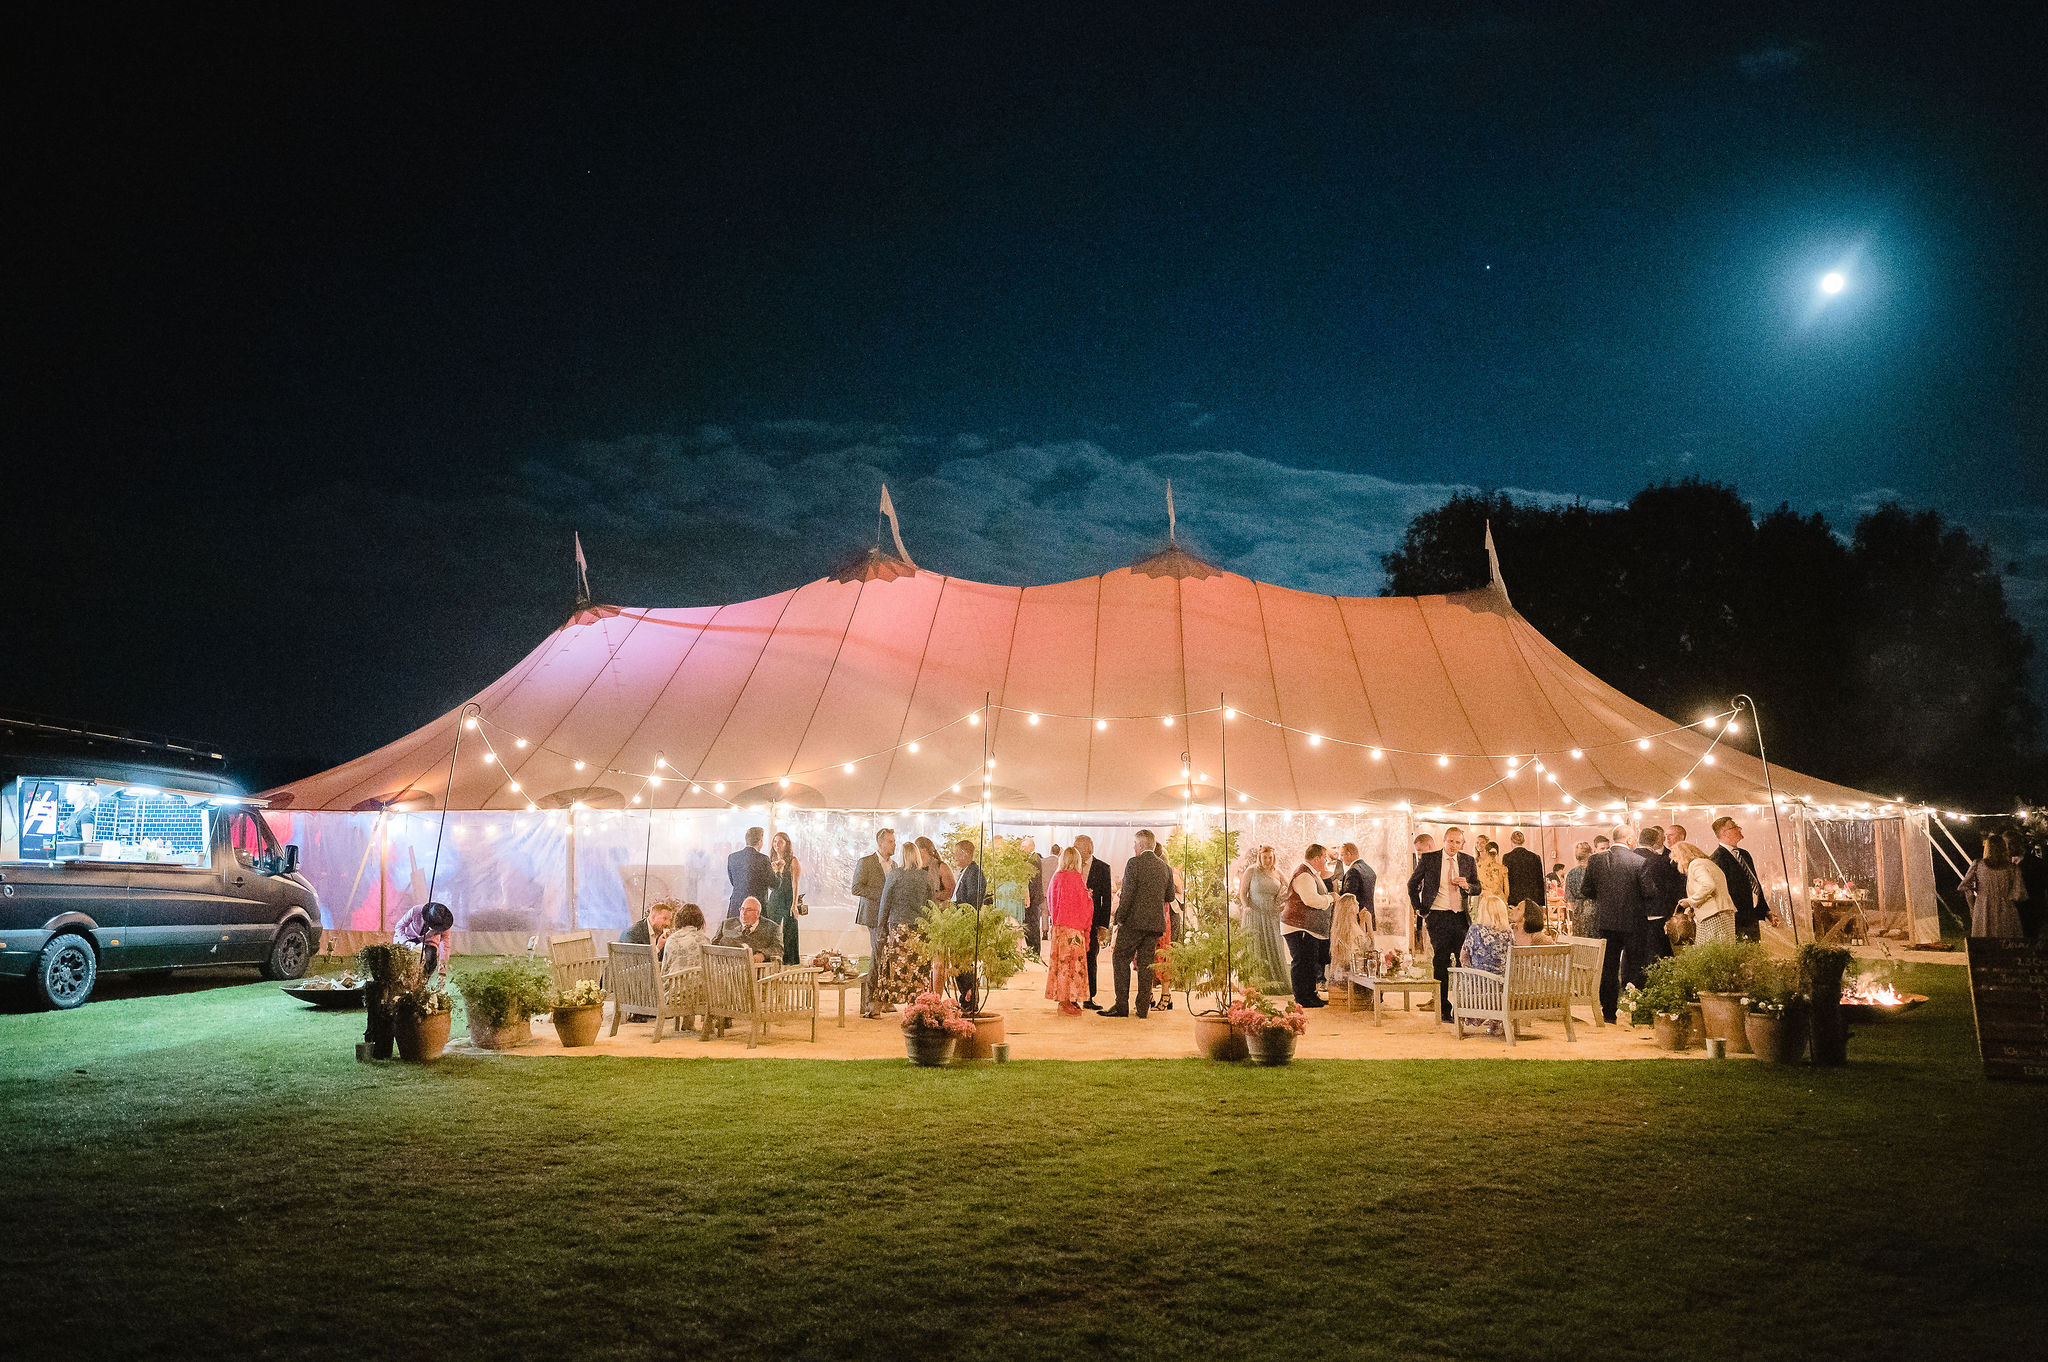 An outdoor marquee in a wedding is lit up in the evening sky